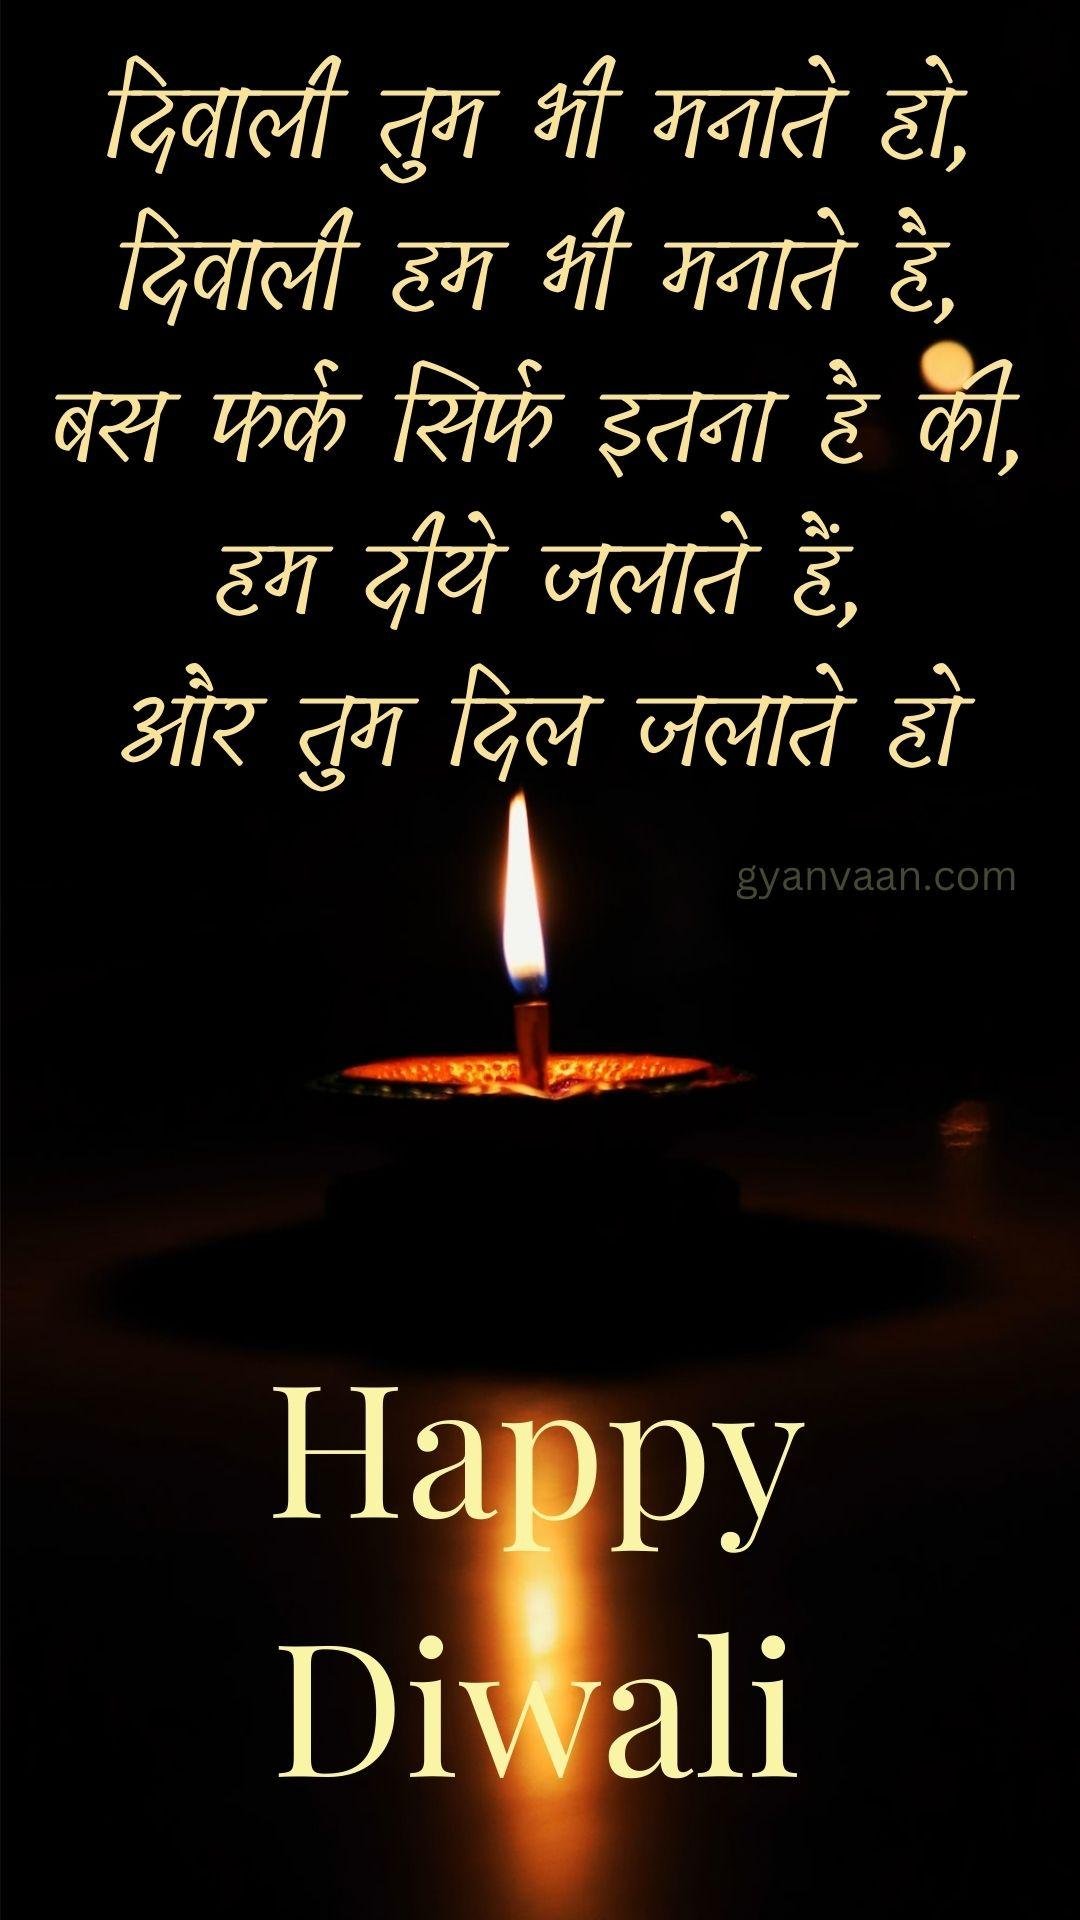 Diwali Quotes In Hindi With Wishes2 - Diwali Quotes In Hindi